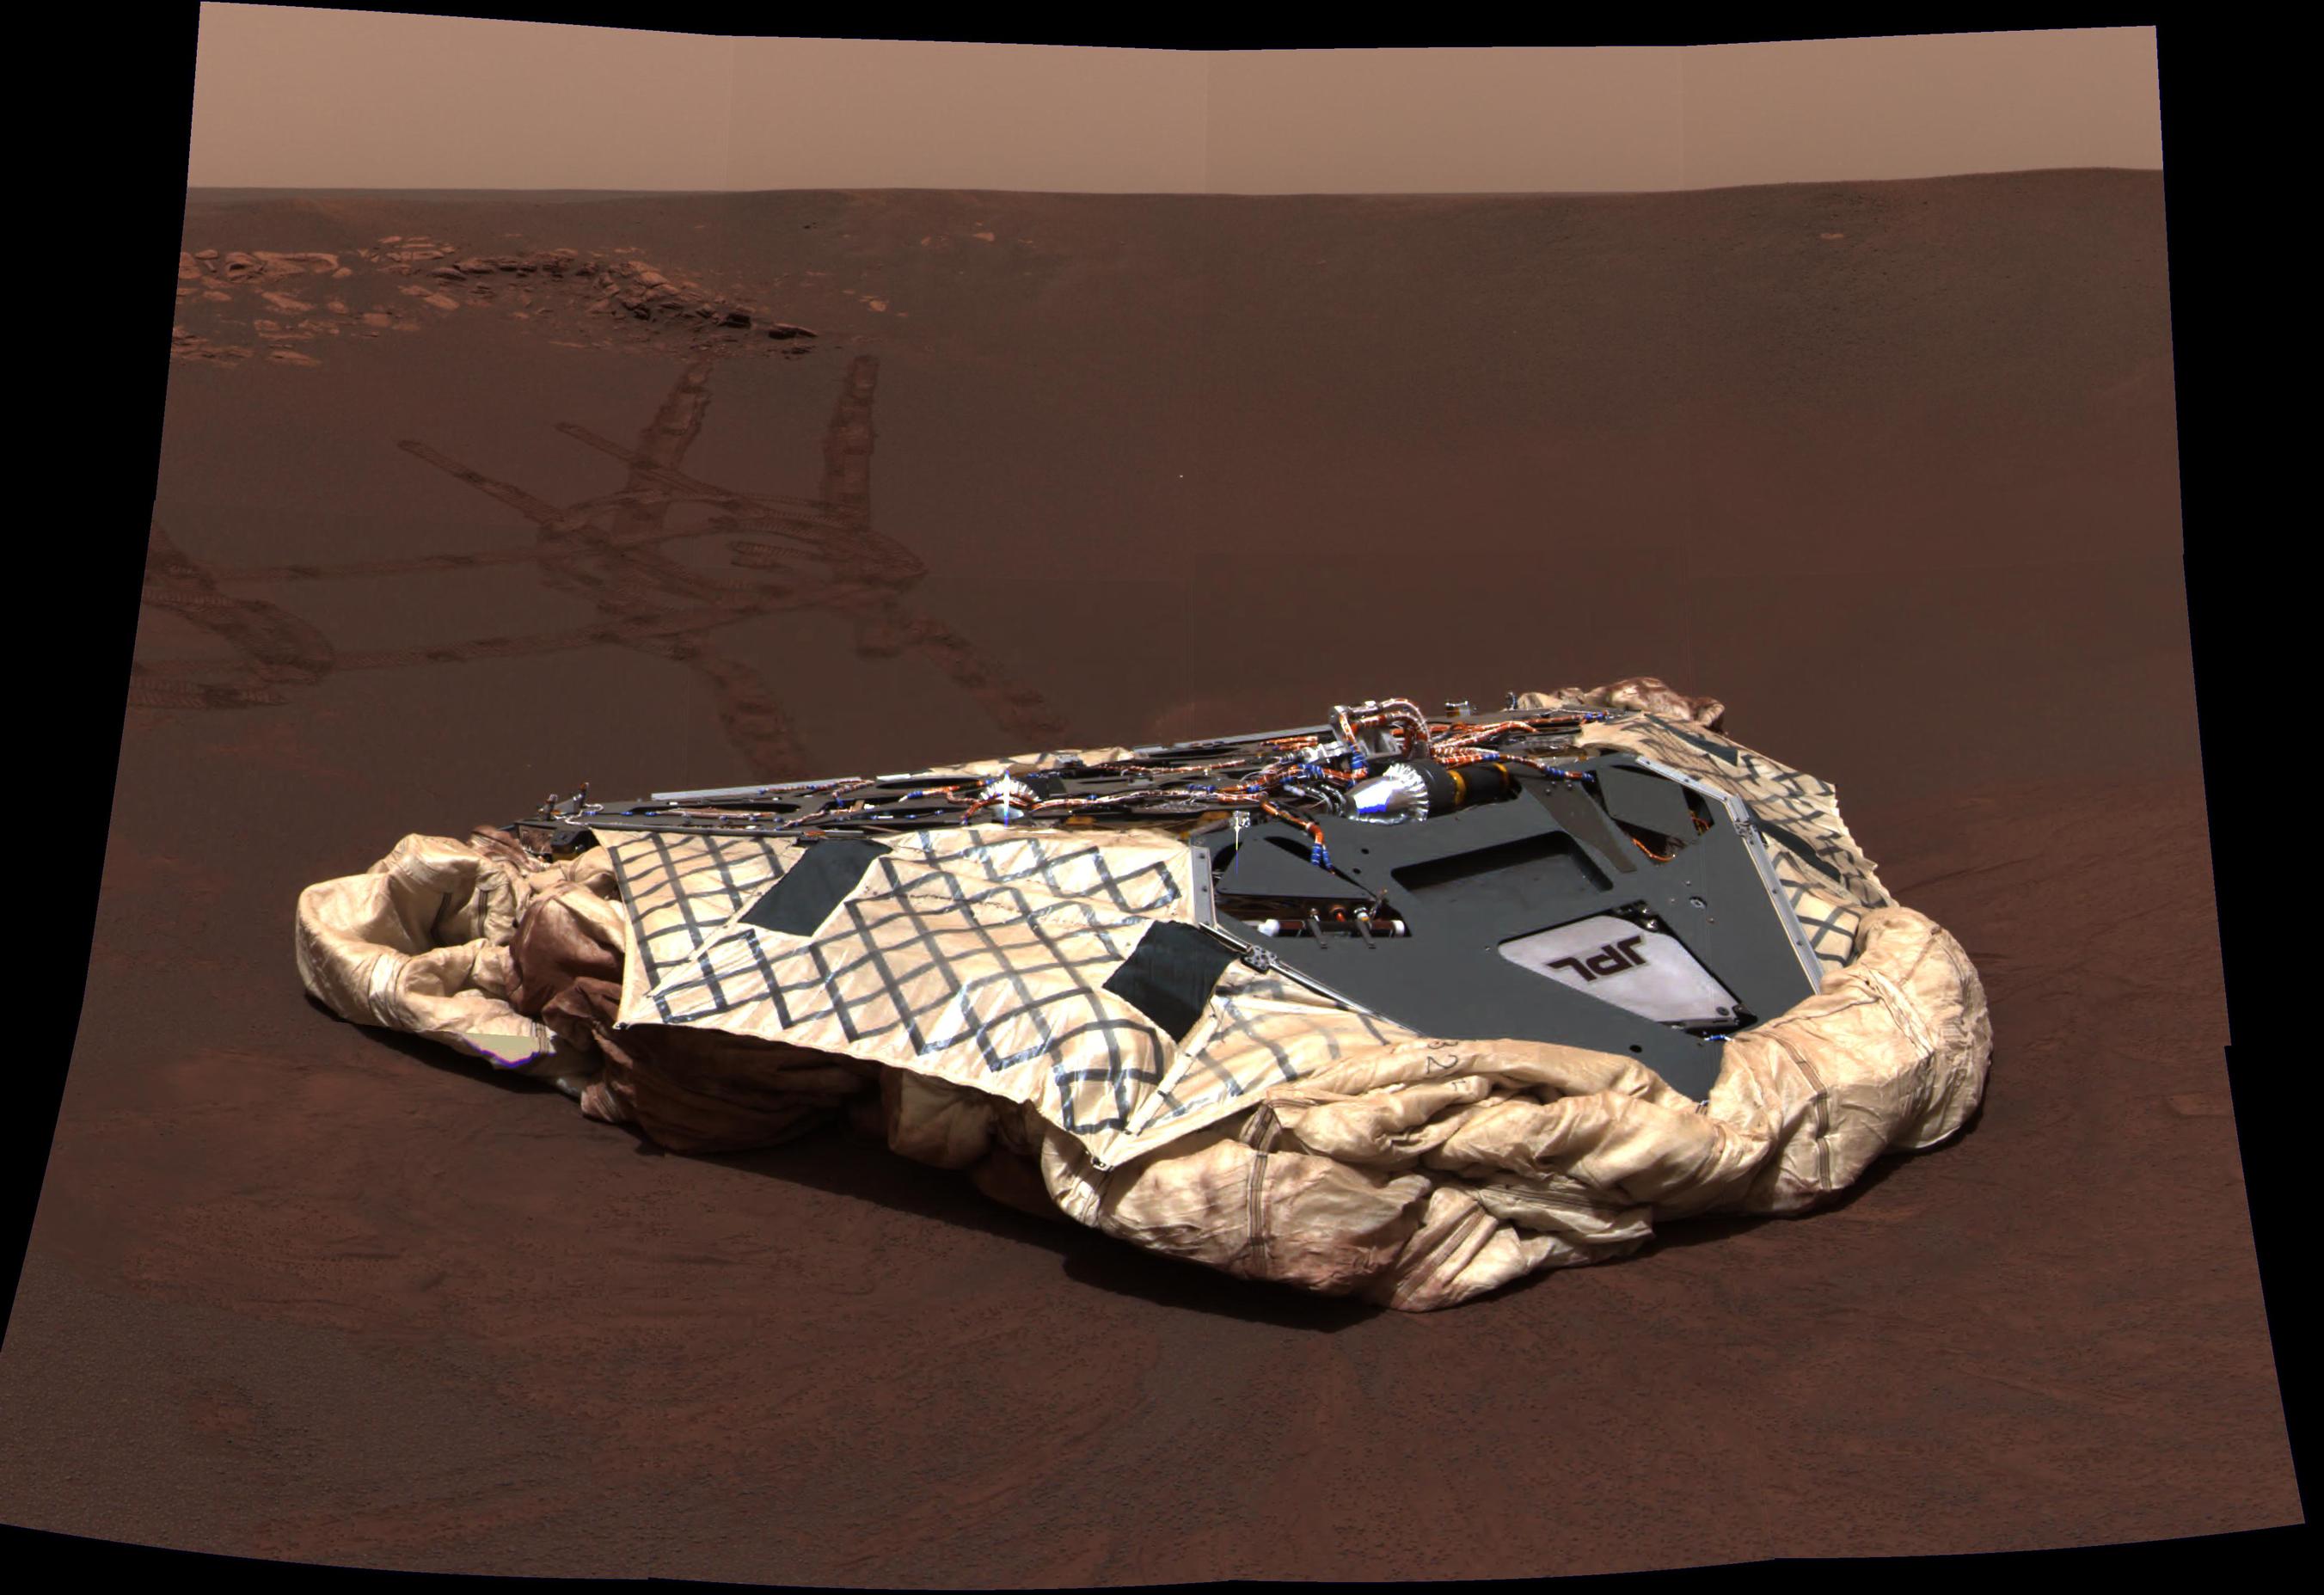 This image taken by the panoramic camera onboard Opportunity shows the rover's now-empty lander, the Challenger Memorial Station, at Meridiani Planum, Mars.